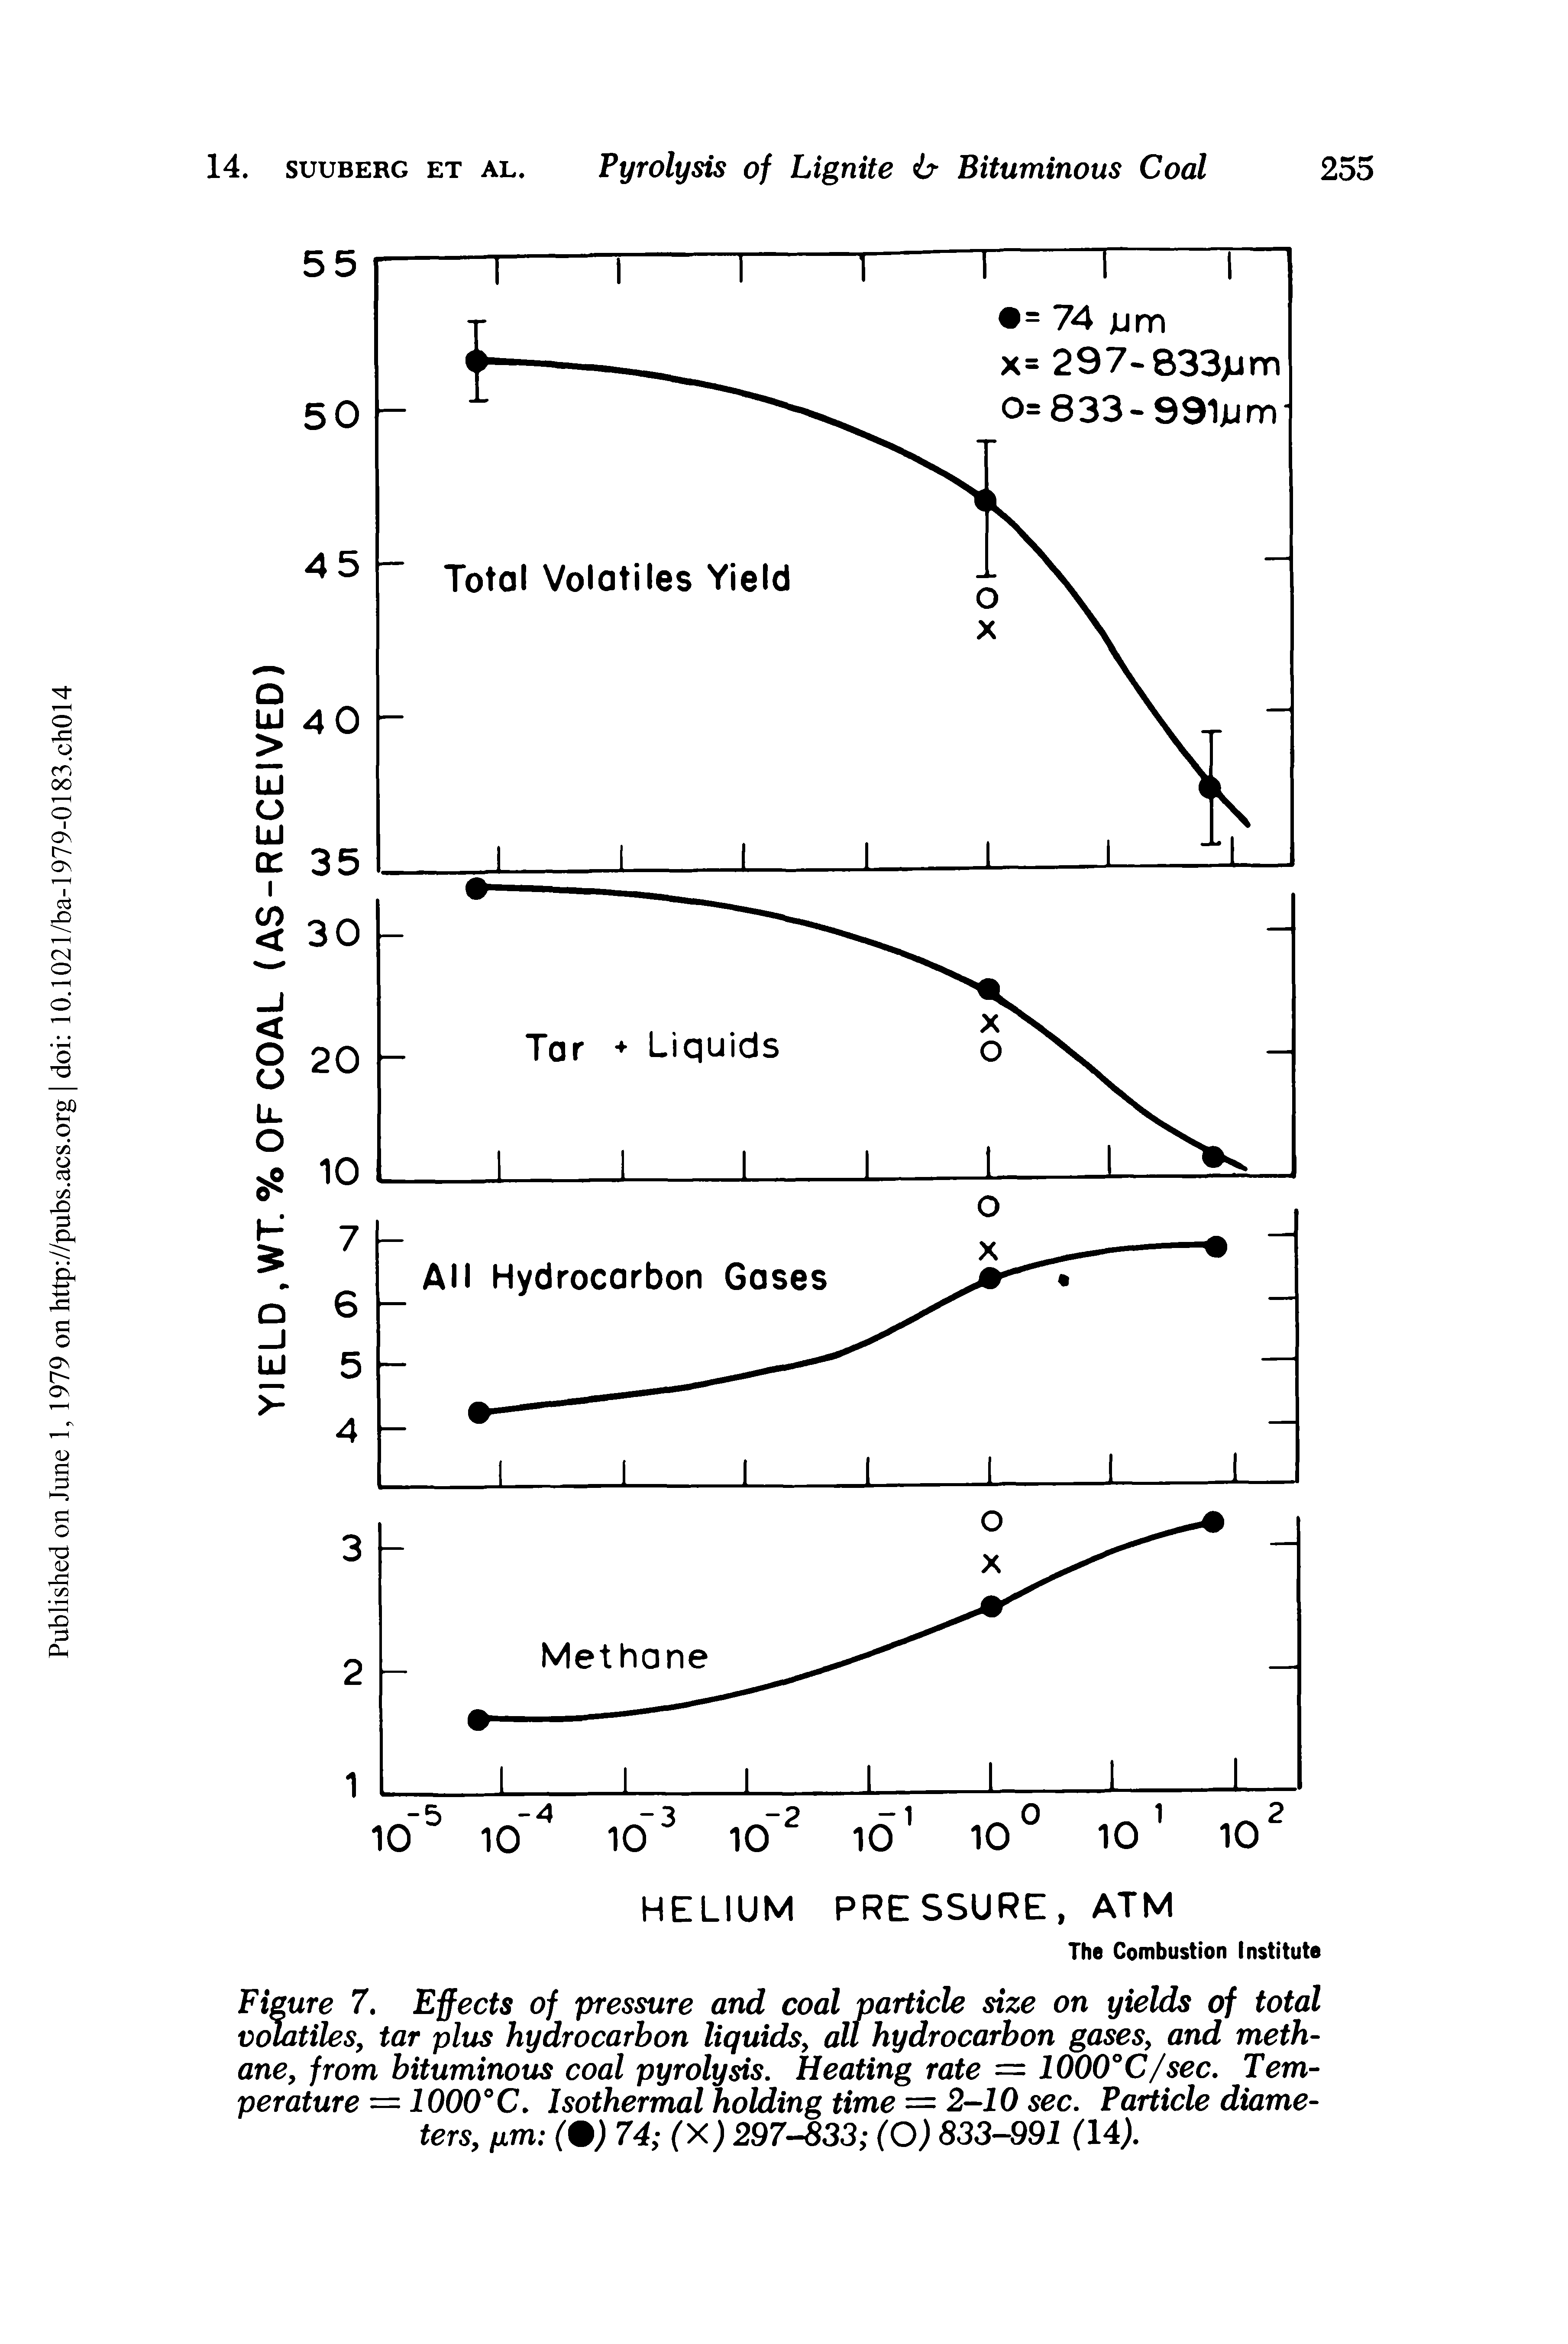 Figure 7. Effects of pressure and coal particle size on yields of total volatiles, tar plus hydrocarbon liquids, all hydrocarbon gases, and methane, from bituminous coal pyrolysis. Heating rate = 1000°C/sec. Temperature = 1000°C. Isothermal holding time = 2-10 sec. Particle diameters, ixm C) 74 (X) 297-833 (O) 833-991 (14).